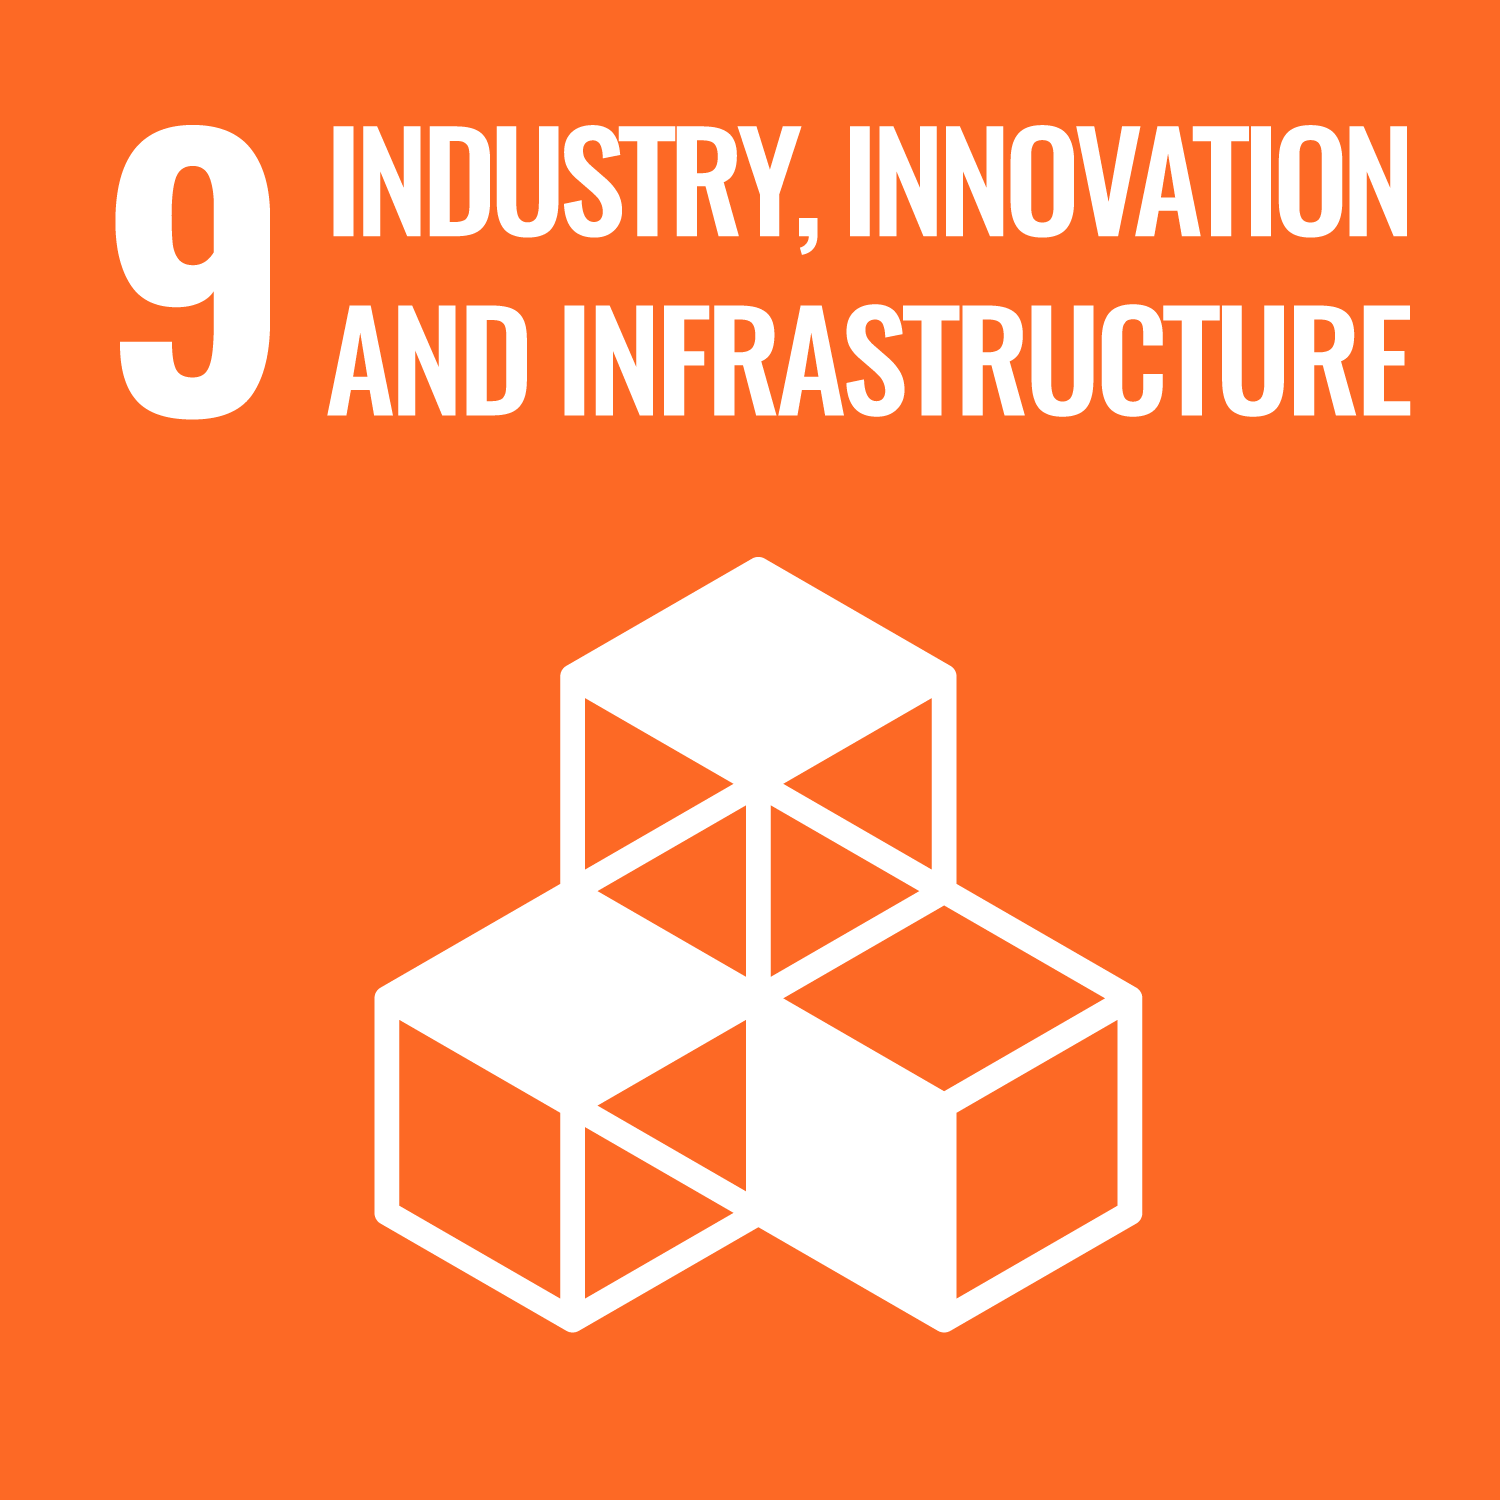 United Nations SDG goals for Industry, Innovation and Infrastructur